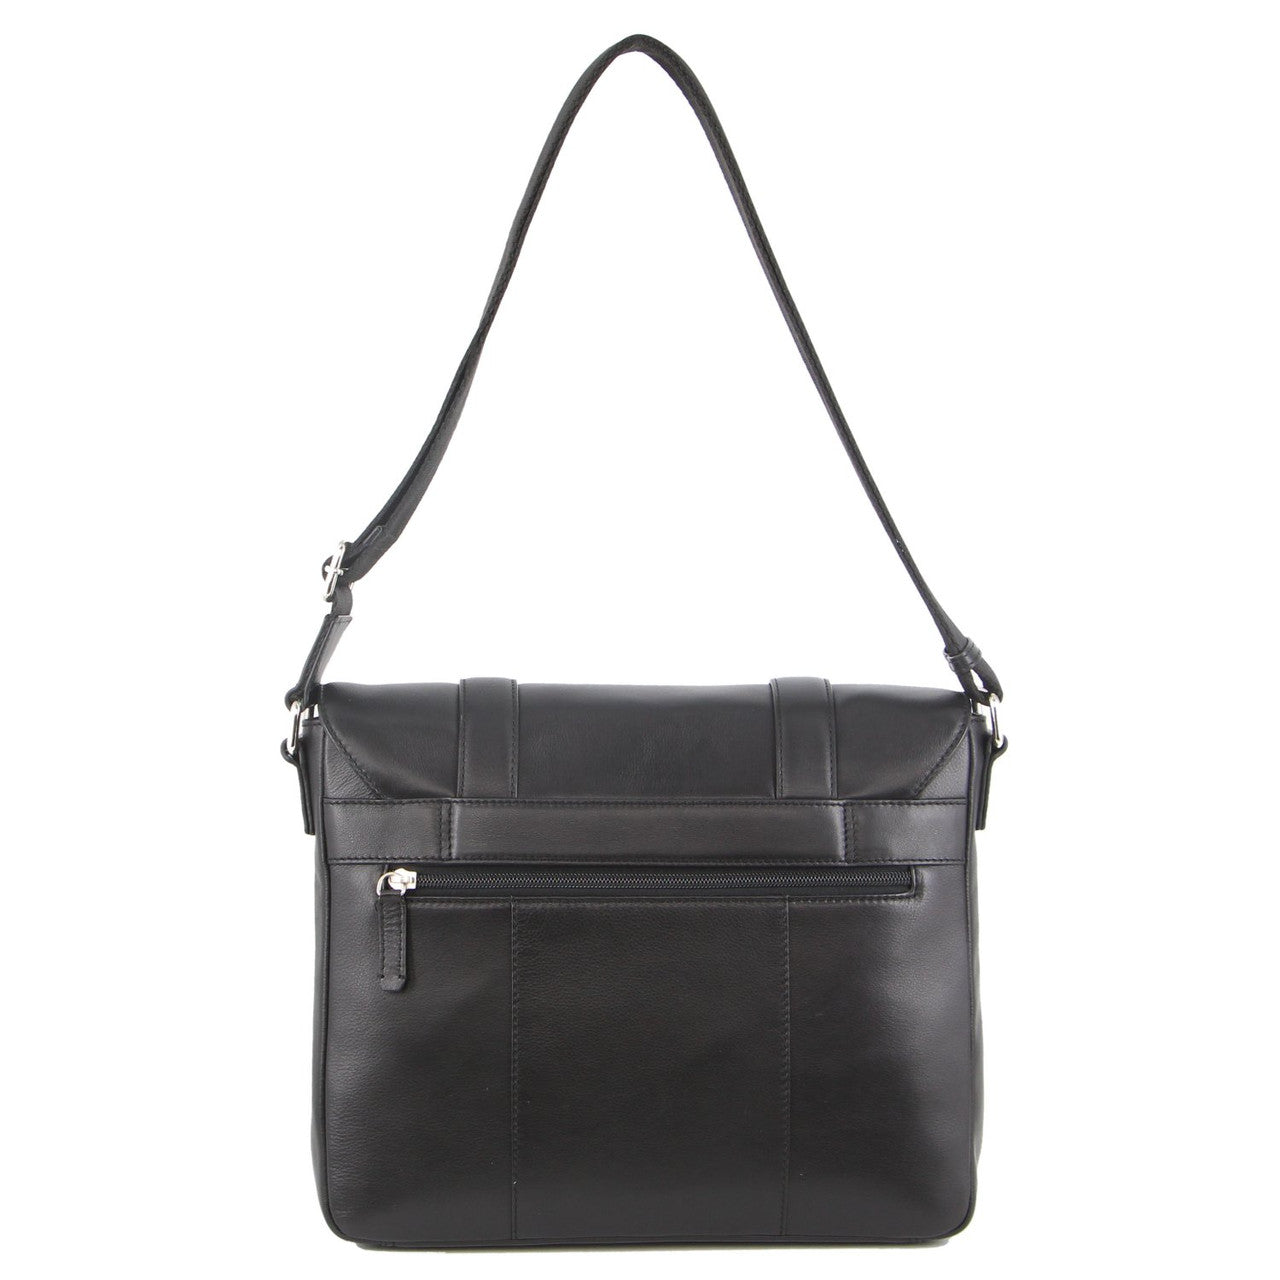 Pierre Cardin Pebbled Leather with perforated design Satchel with flap closure PC3302 Black *DC-4